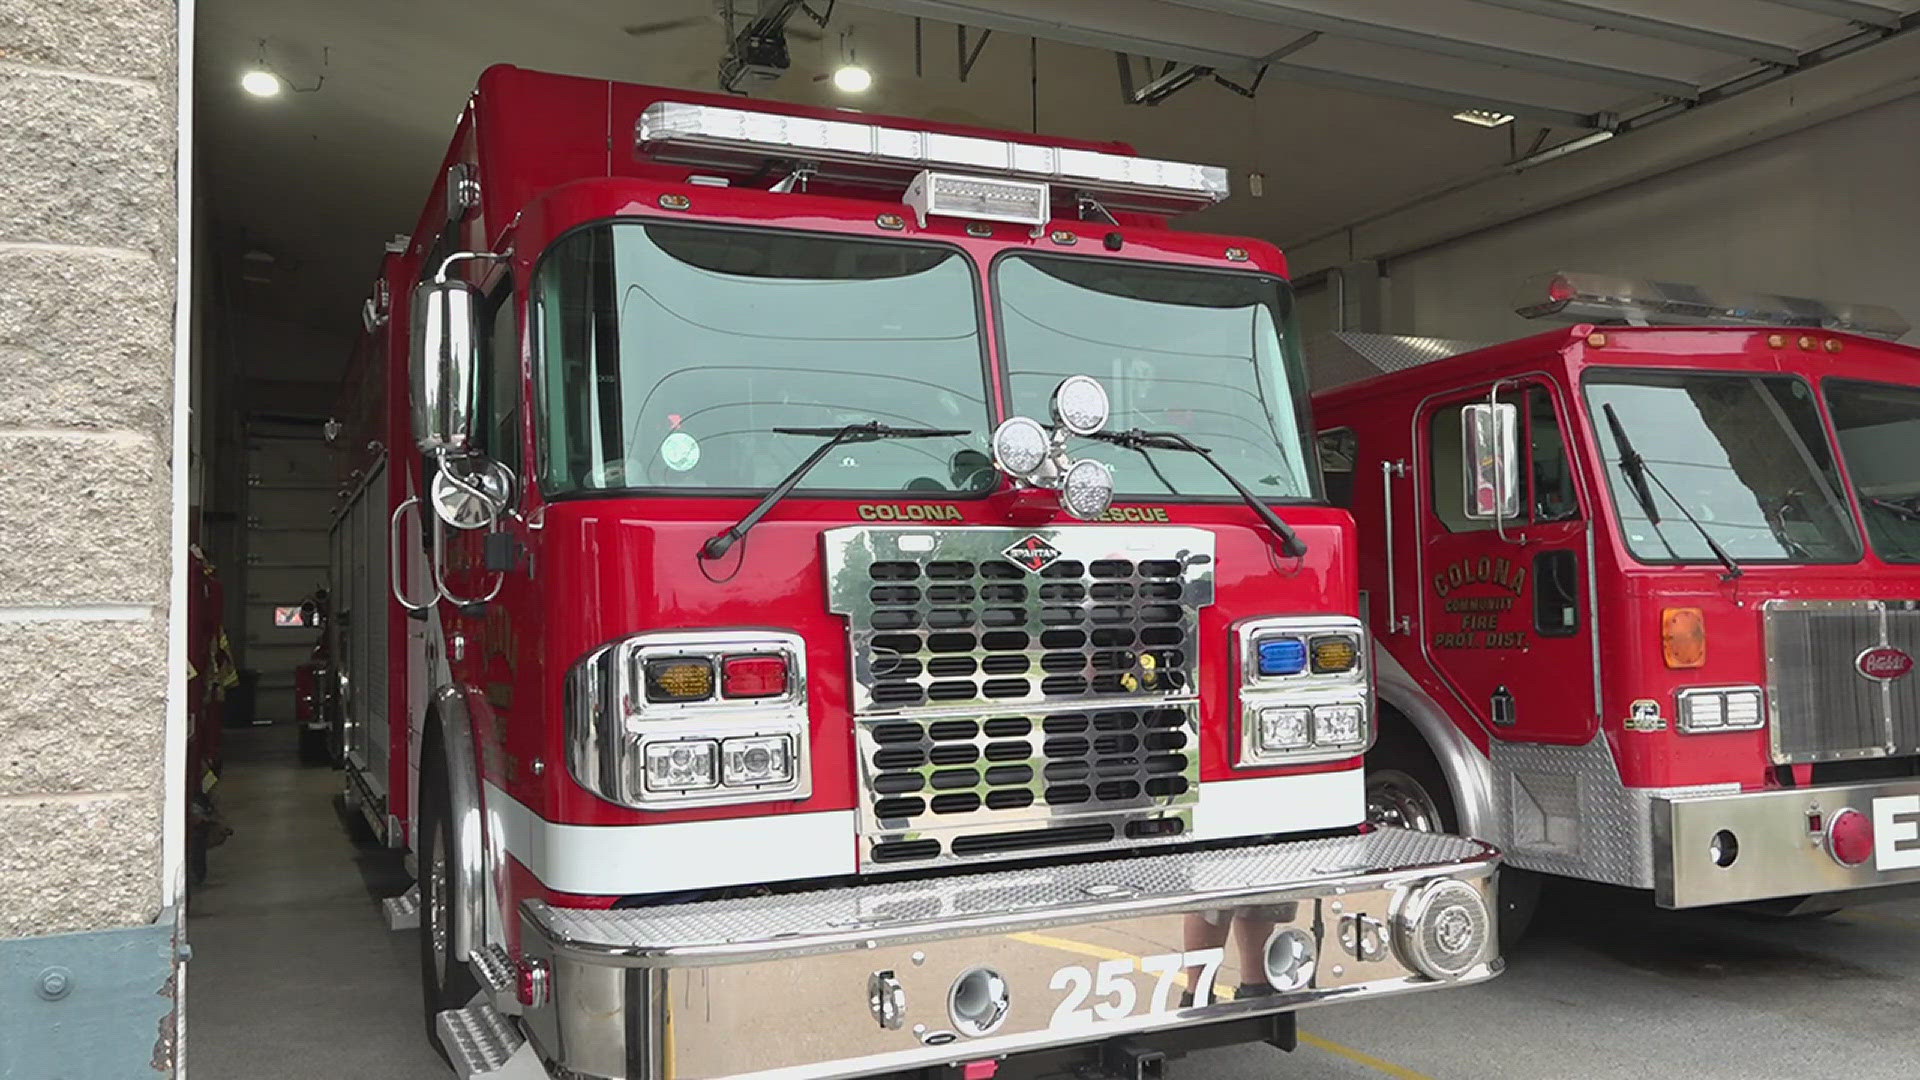 OSHA recently released a 600-page proposal suggesting unfunded mandates that local officials say could negatively impact volunteer fire departments.